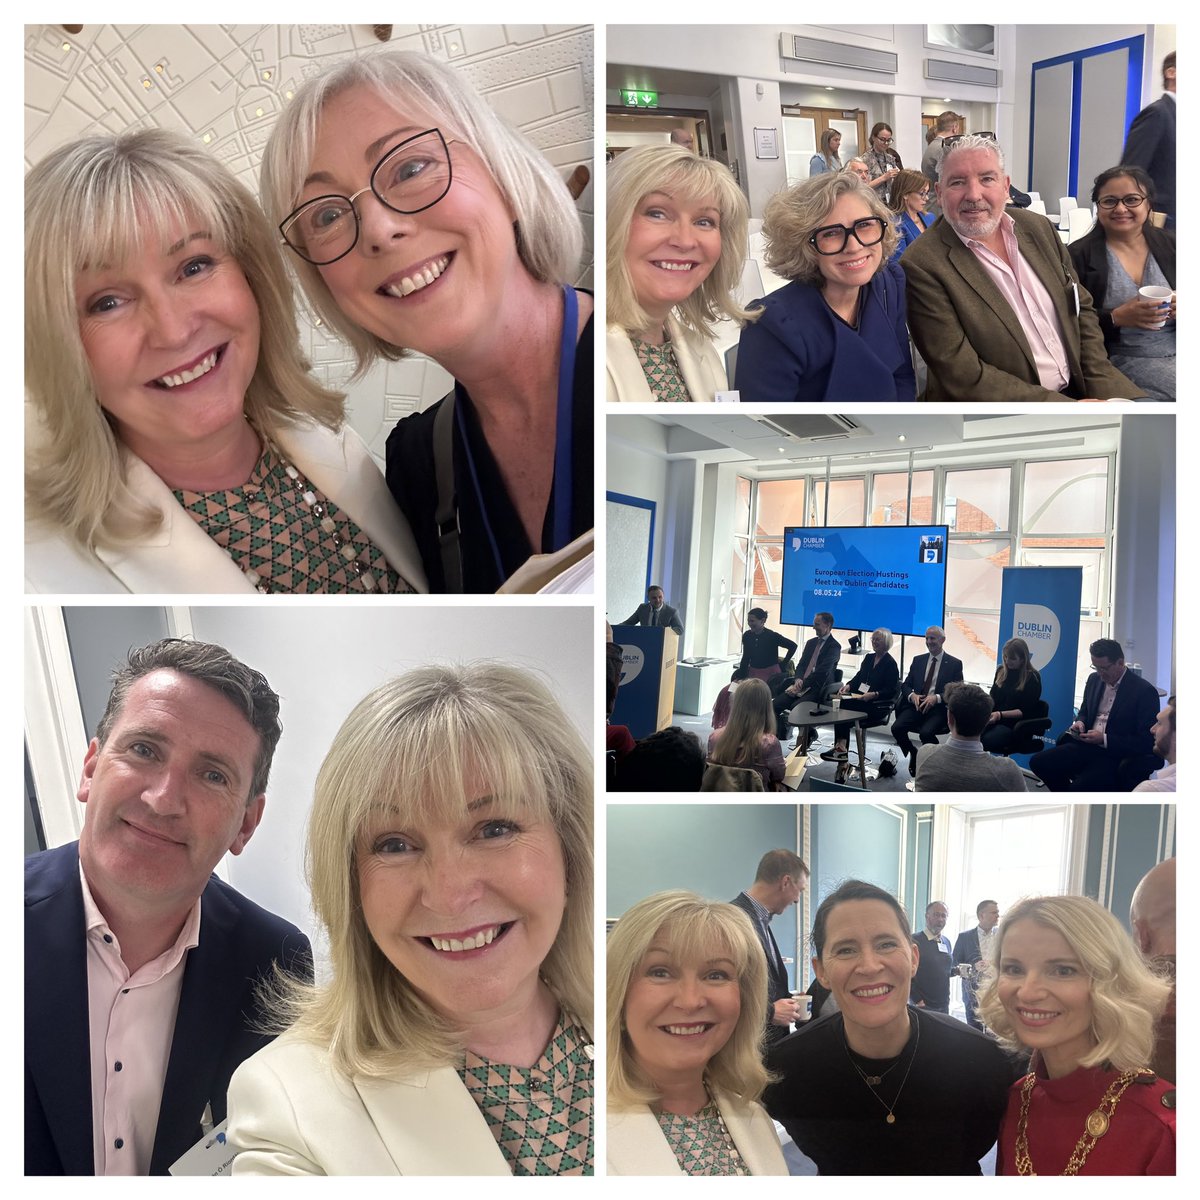 Very informative event thanks to @SiobhanOShea21 & @DubCham team! Great chats with many of the European Election candidates. Thanks to @sineadgibney for mentioning the positive impact of @ncirl, lovely to meet Twitter pal @ReginaDo in person & to chat to @AodhanORiordain 🇮🇪🇪🇺